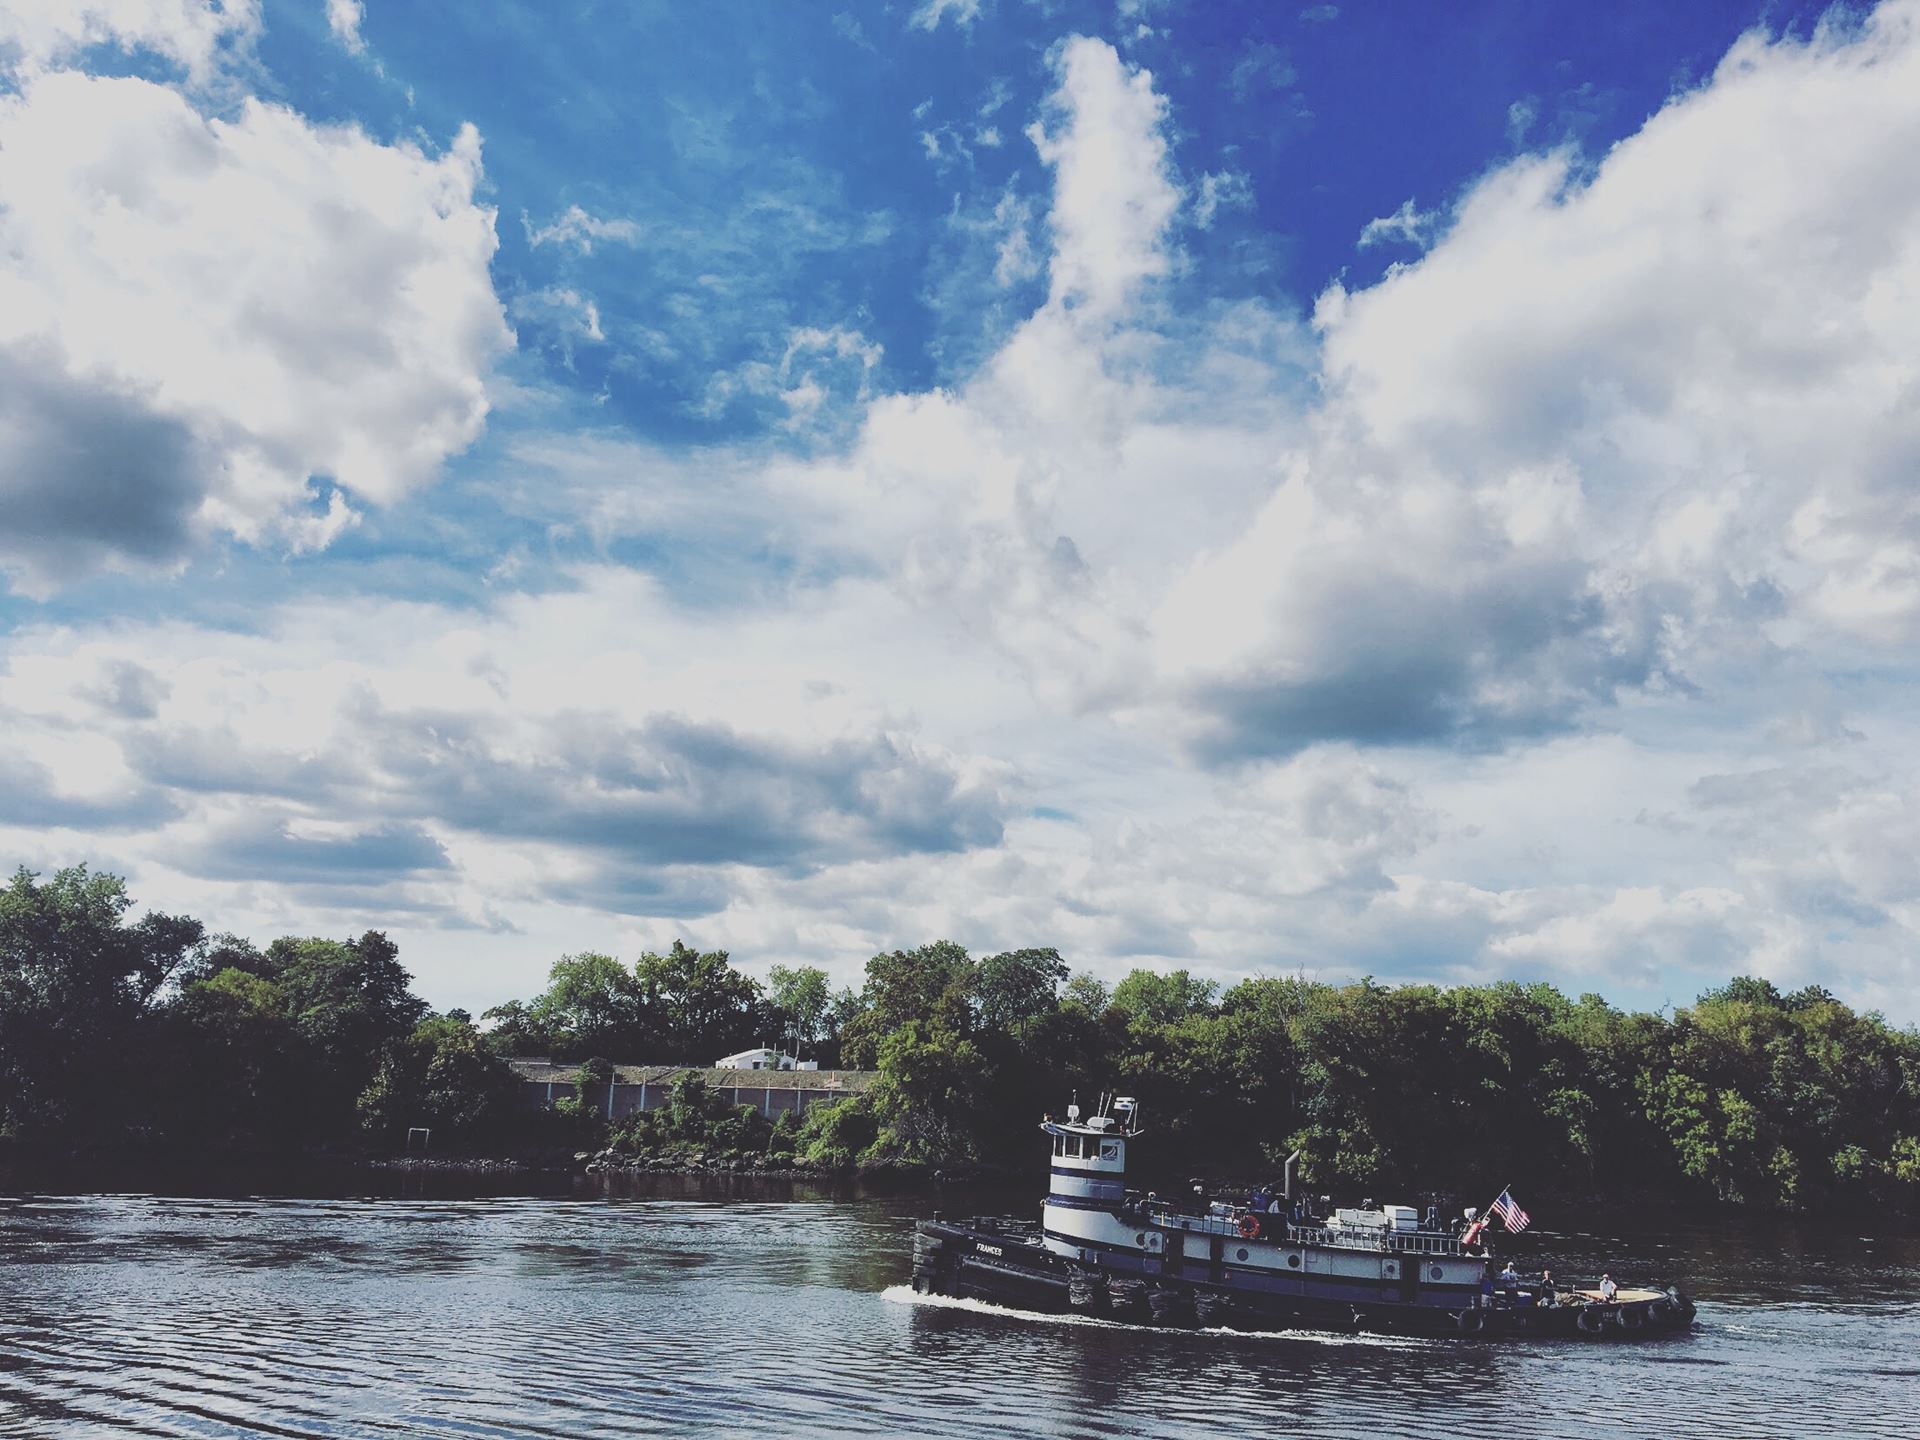 A tugboat going along the Erie Canal